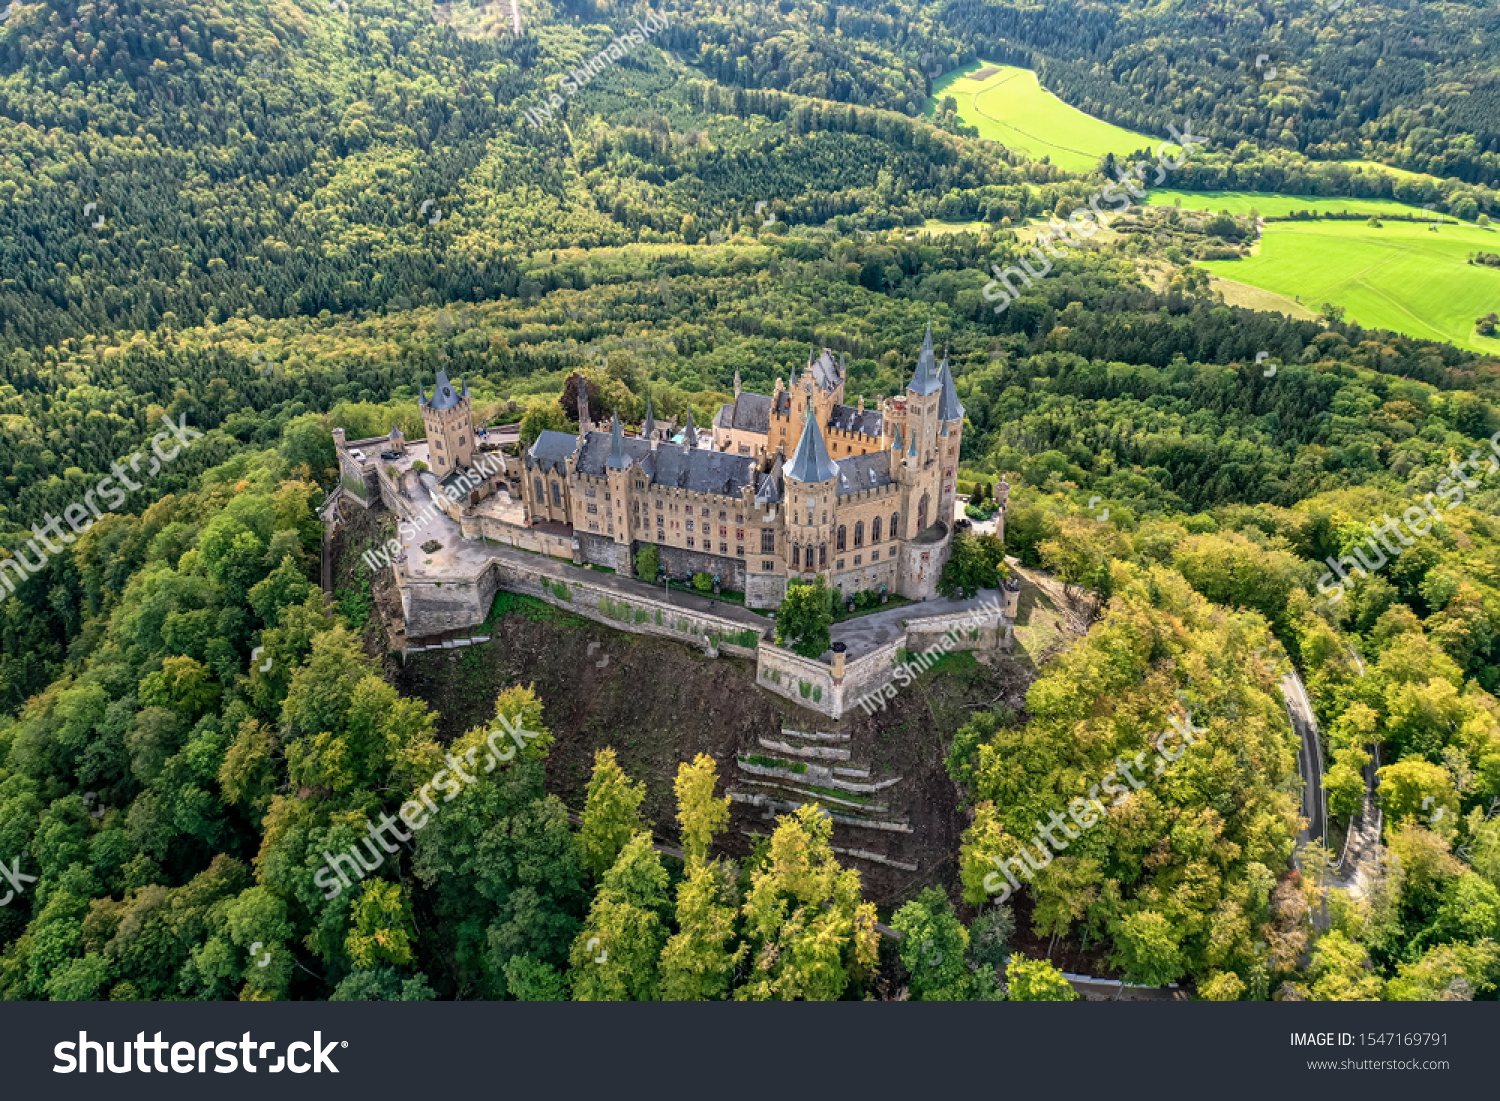 Aerial panorama of Burg Hohenzollern (Hohenzollern castle) with hills and villages surrounded by forests with beautiful foliage #1547169791